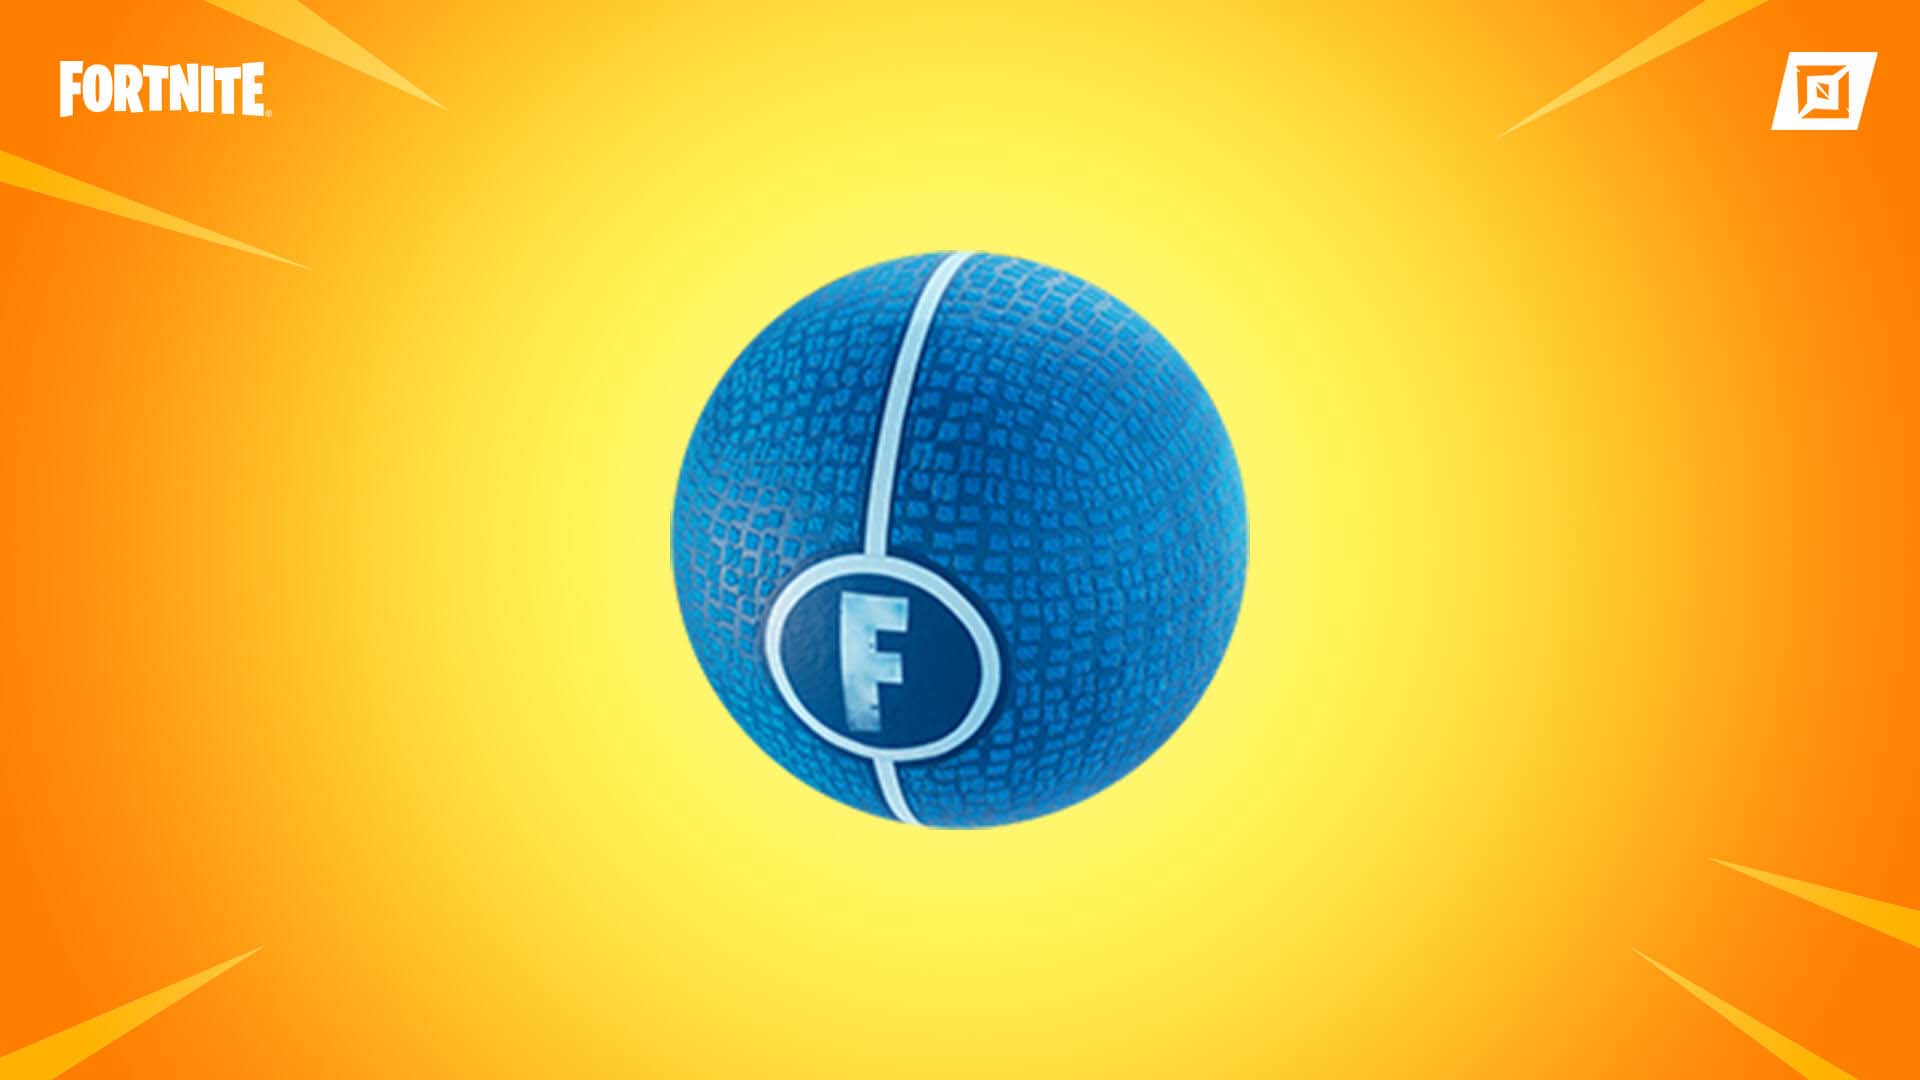 Fortnite Creative v23.20 patch notes – includes new Ball Spawner